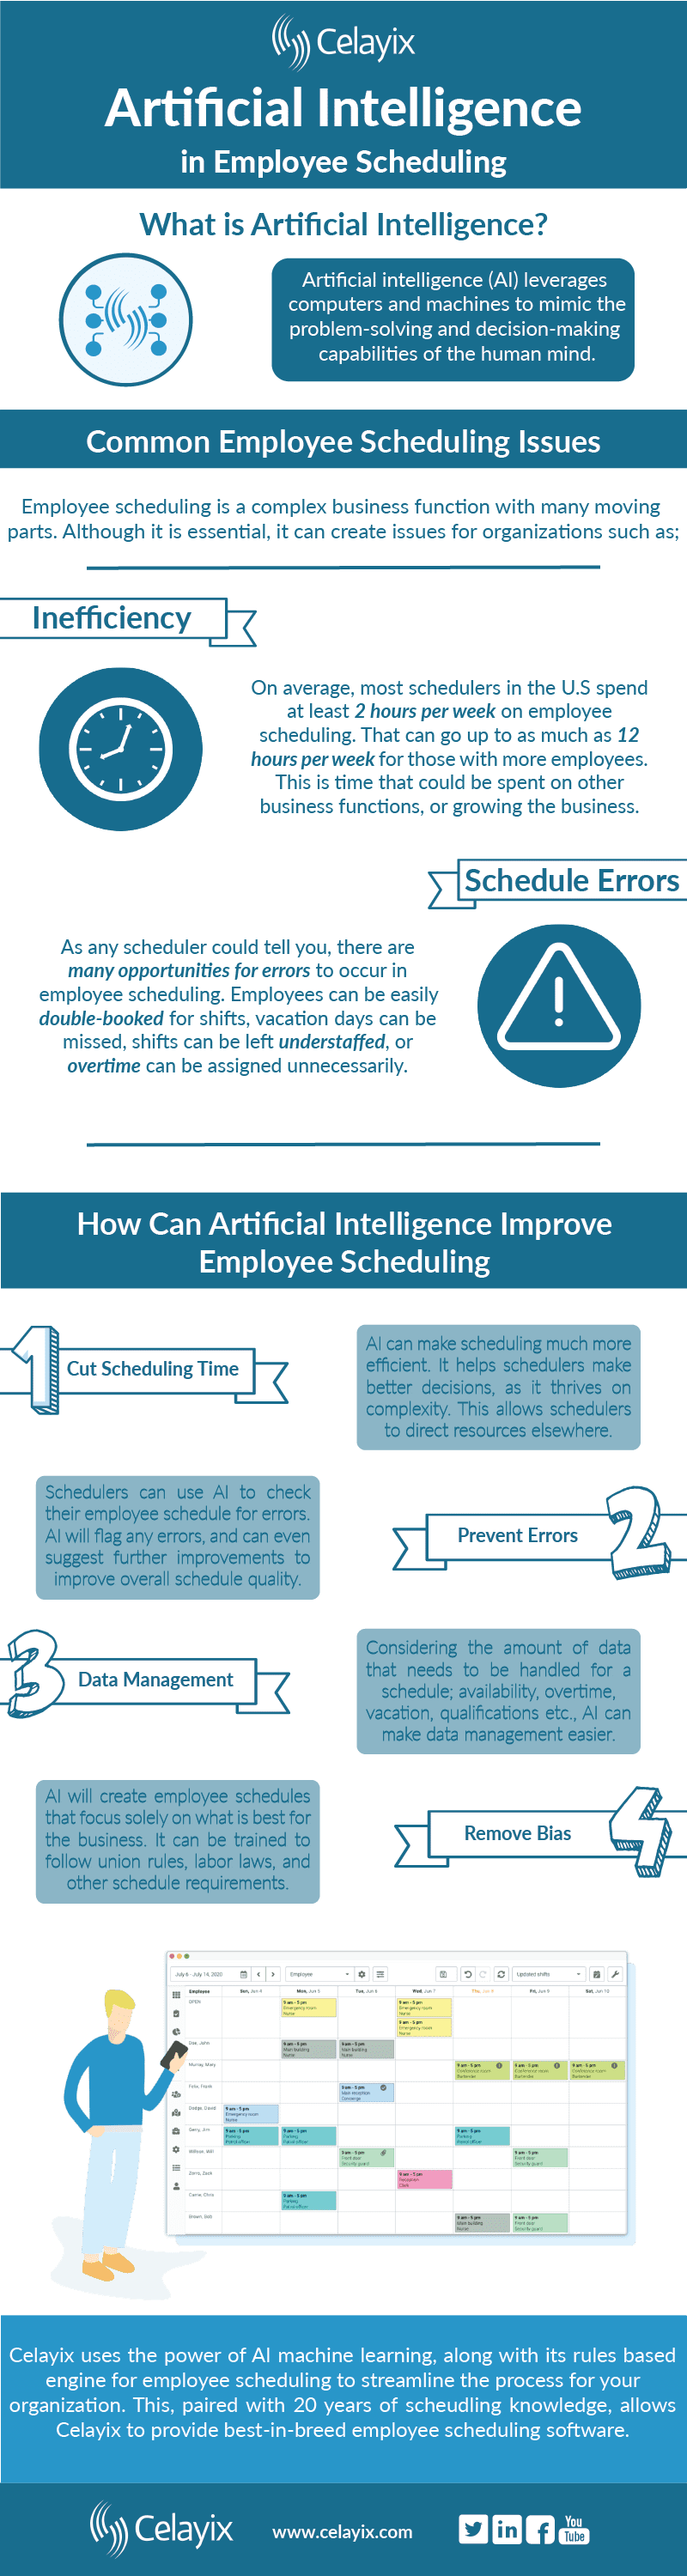 artificial intelligence in employee scheduling infographic